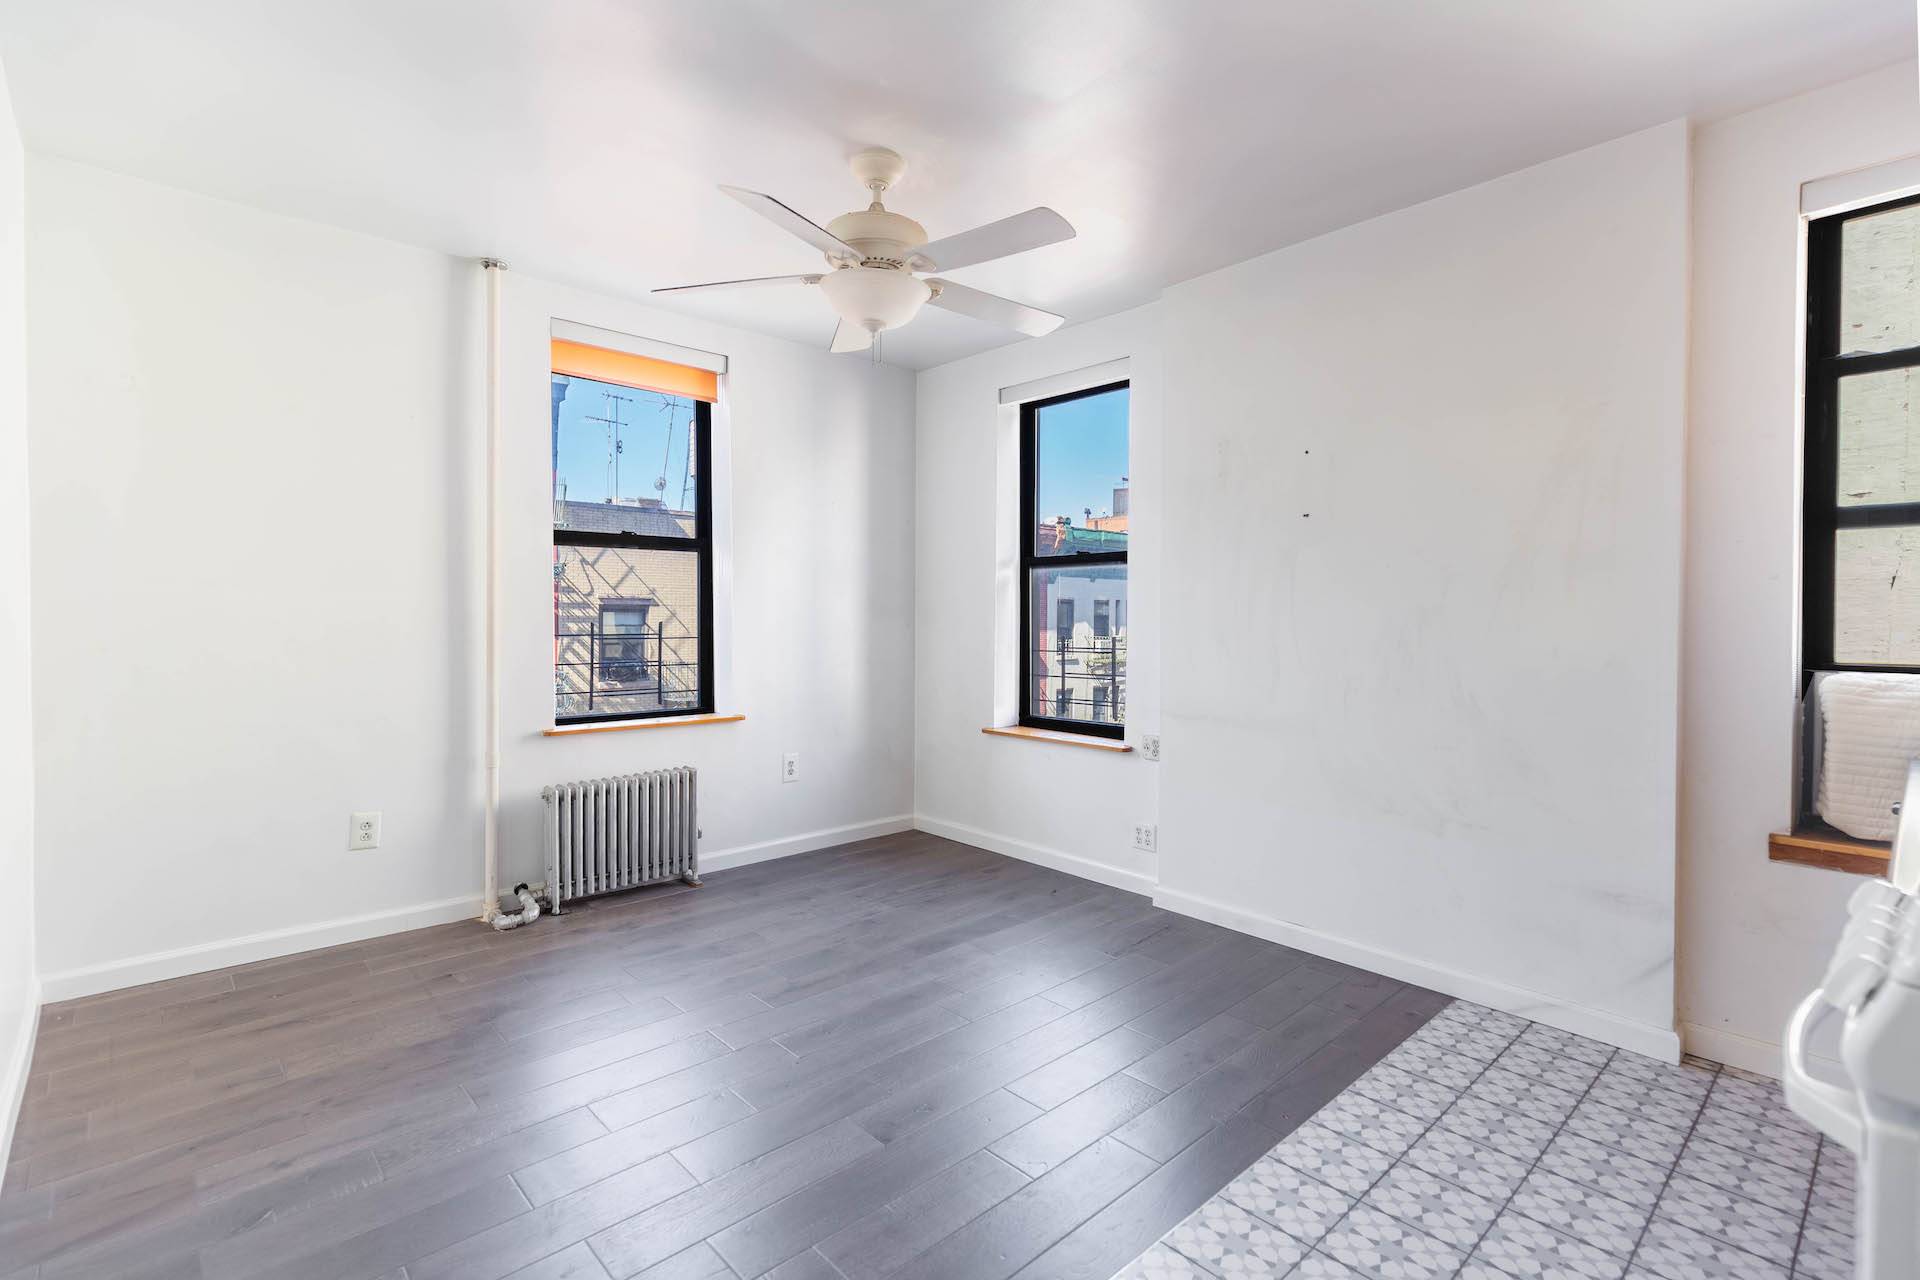 Welcome home to this impeccably stylish Two bedrooms, one bathroom, fully renovated, traditionally loft like residence.